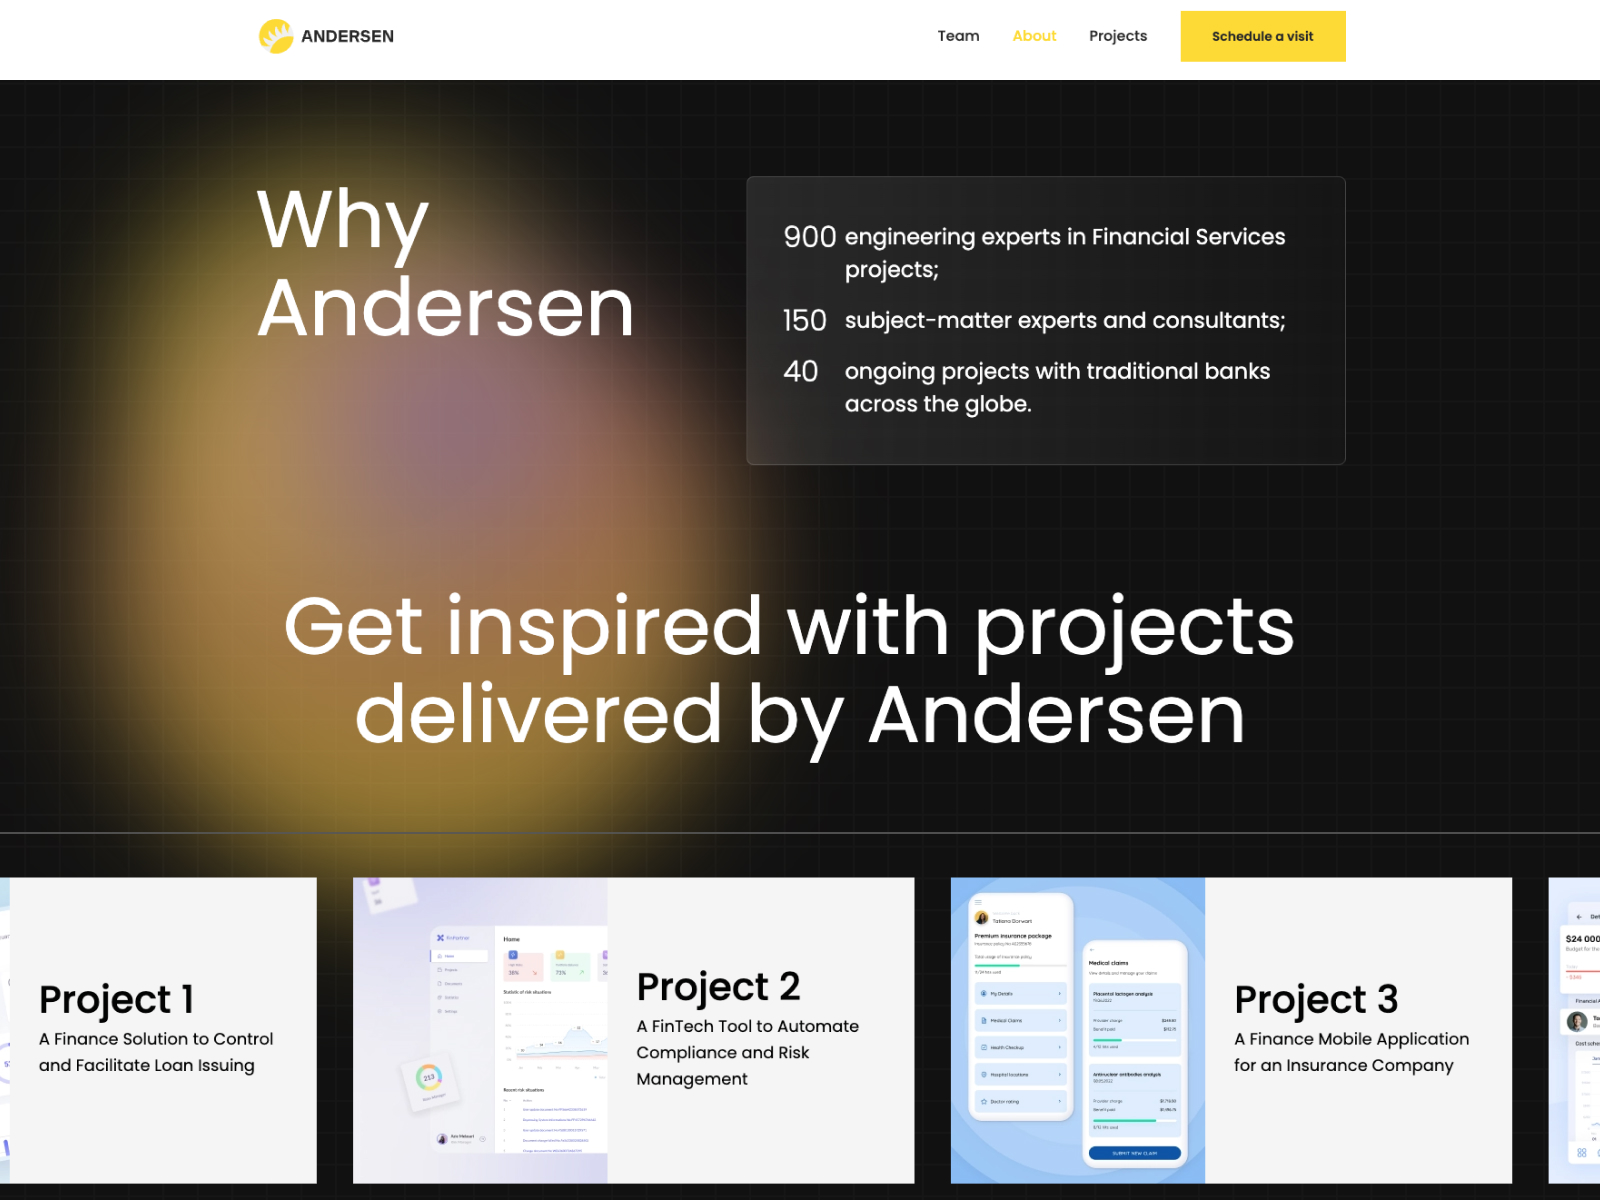 Get inspired with projects delivered by Andersen